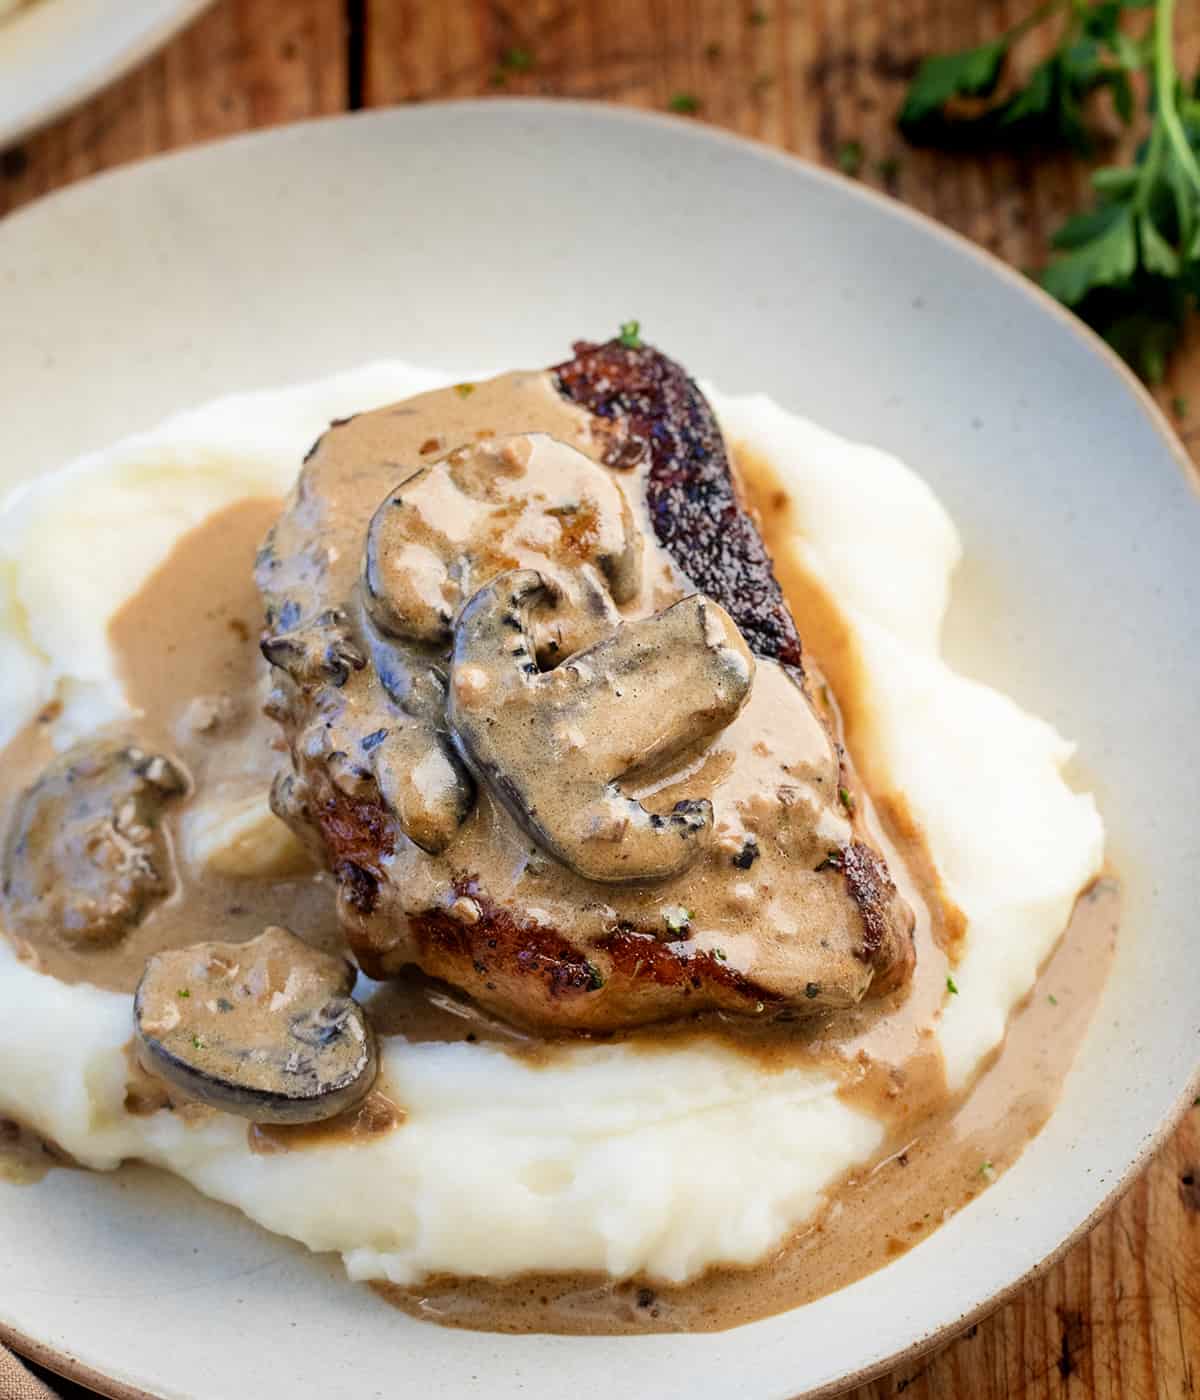 Piece of Creamy Mushroom Pork on a bed of mashed potatoes on a plate.